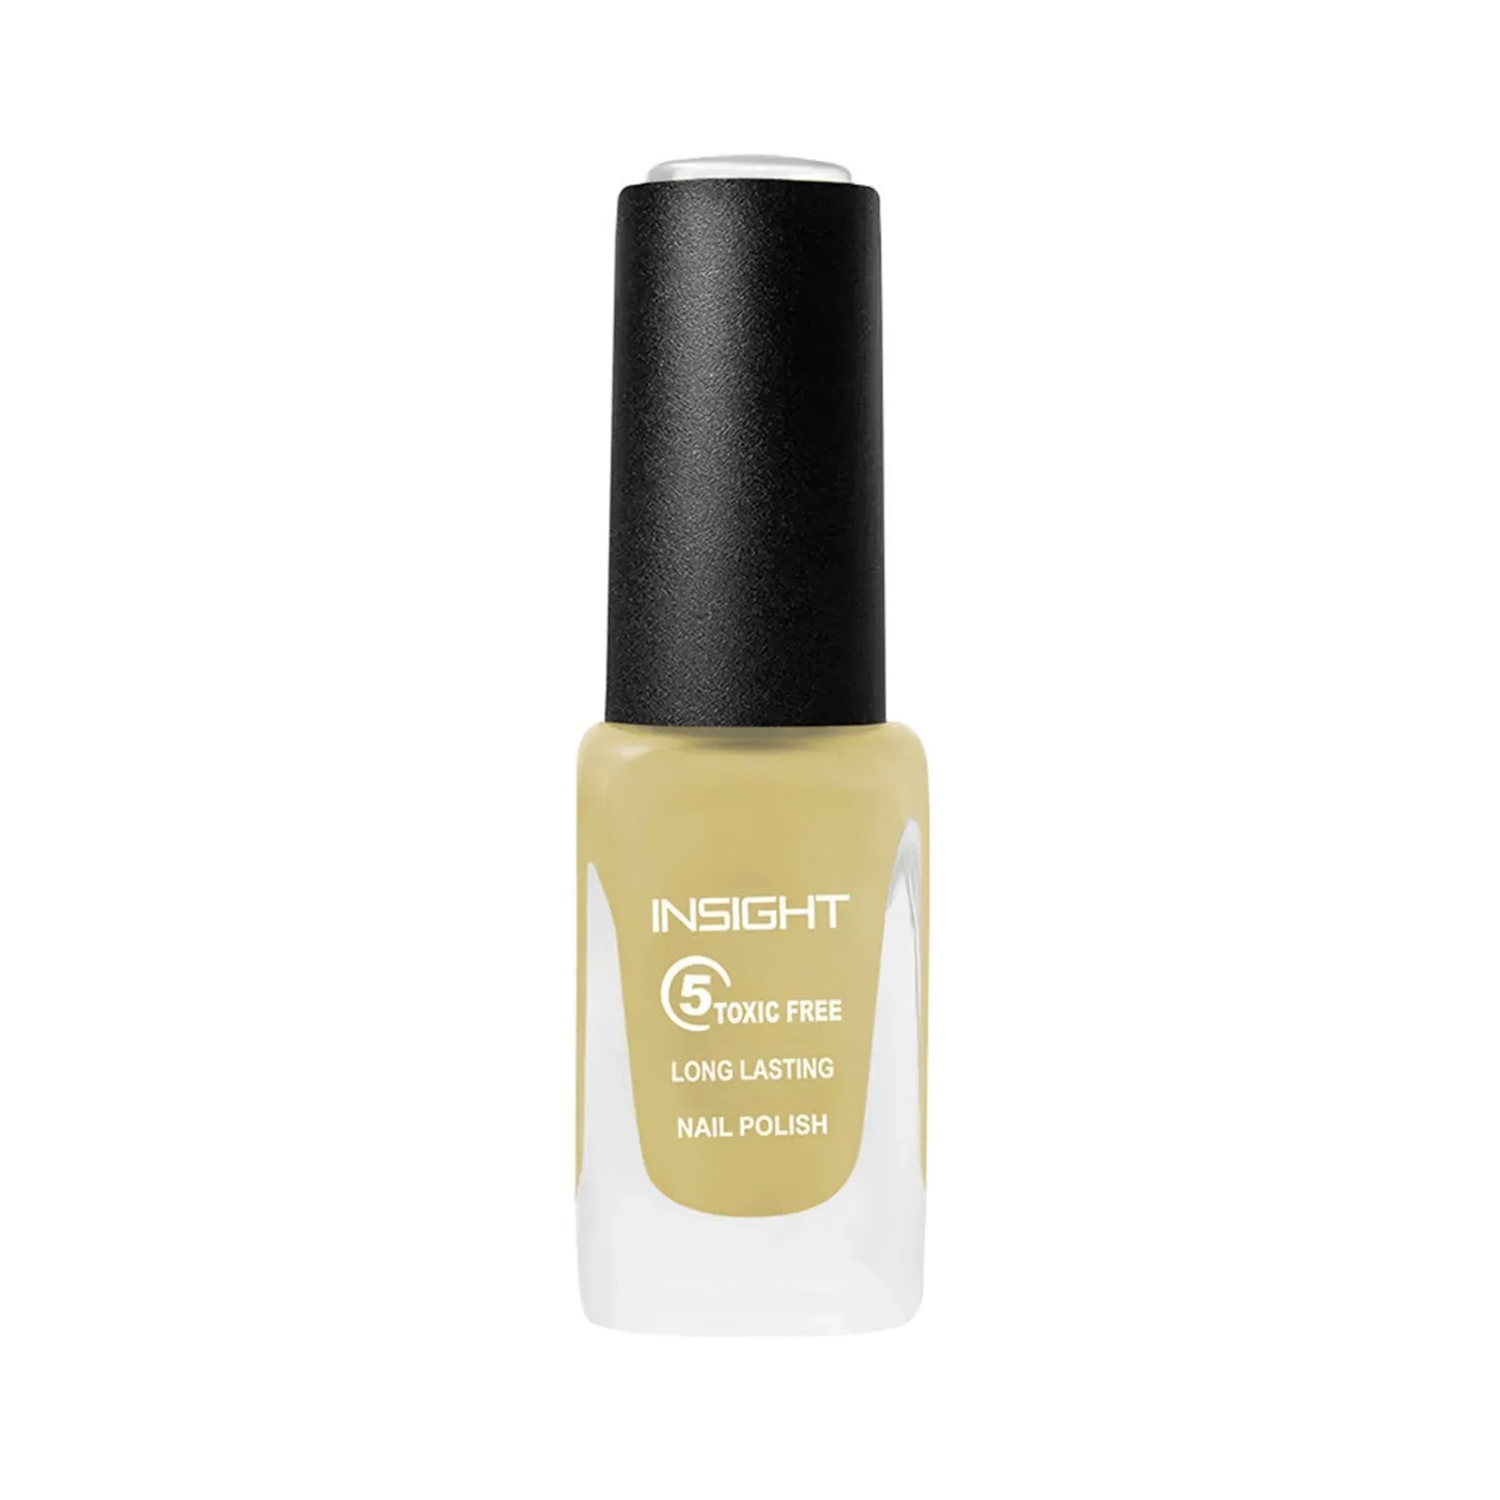 Insight Cosmetics Twilight Nail Polish Formule au Luxembourg (DH154-05) 05  - Price in India, Buy Insight Cosmetics Twilight Nail Polish Formule au  Luxembourg (DH154-05) 05 Online In India, Reviews, Ratings & Features |  Flipkart.com